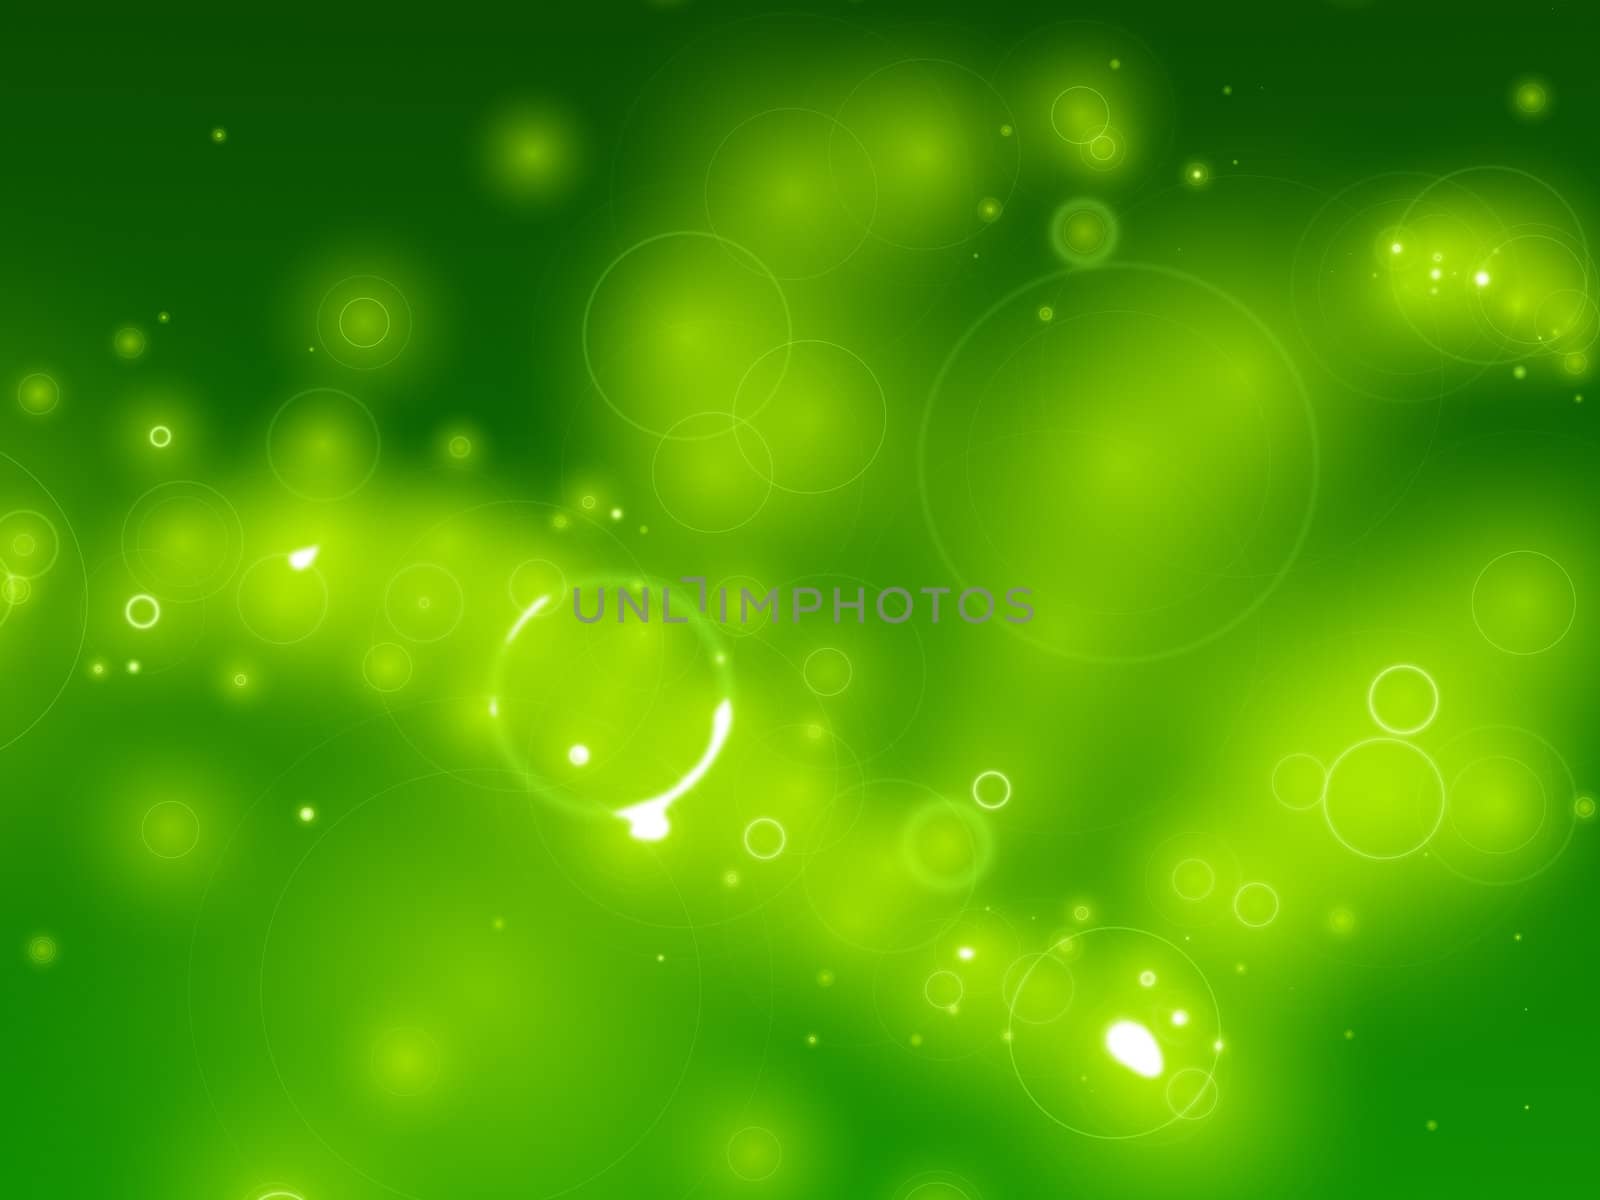 An image of a nice green background